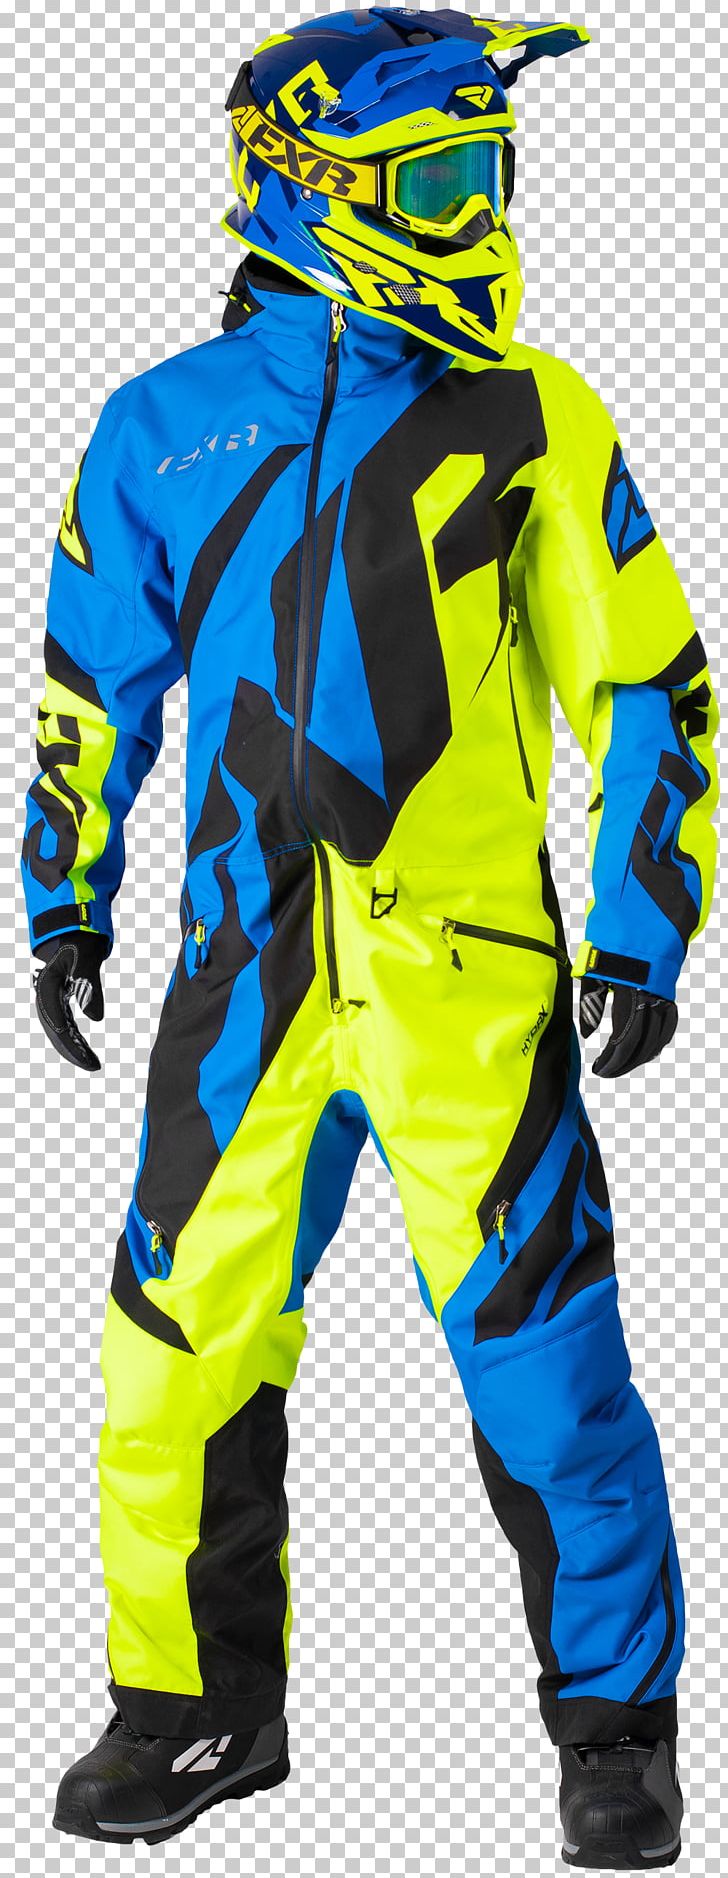 Snowmobile Suit Clothing Snowmobile Suit Long Underwear PNG, Clipart, Blue, Boilersuit, Clothing, Clothing Accessories, Costume Free PNG Download